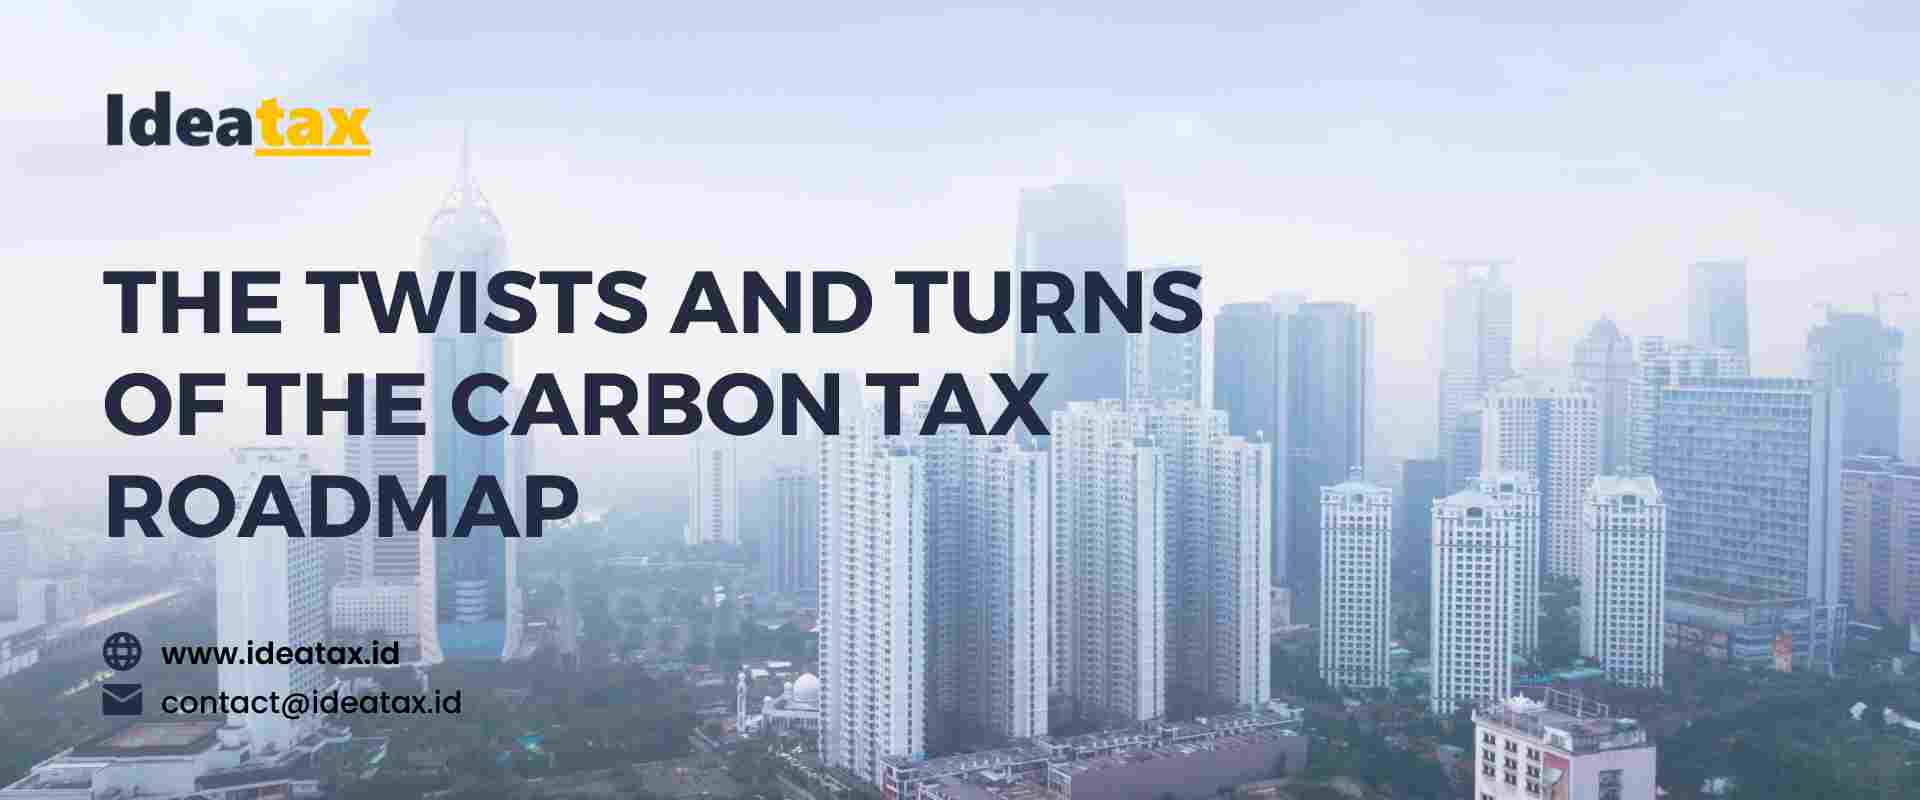 The Twists and Turns of the Carbon Tax Roadmap